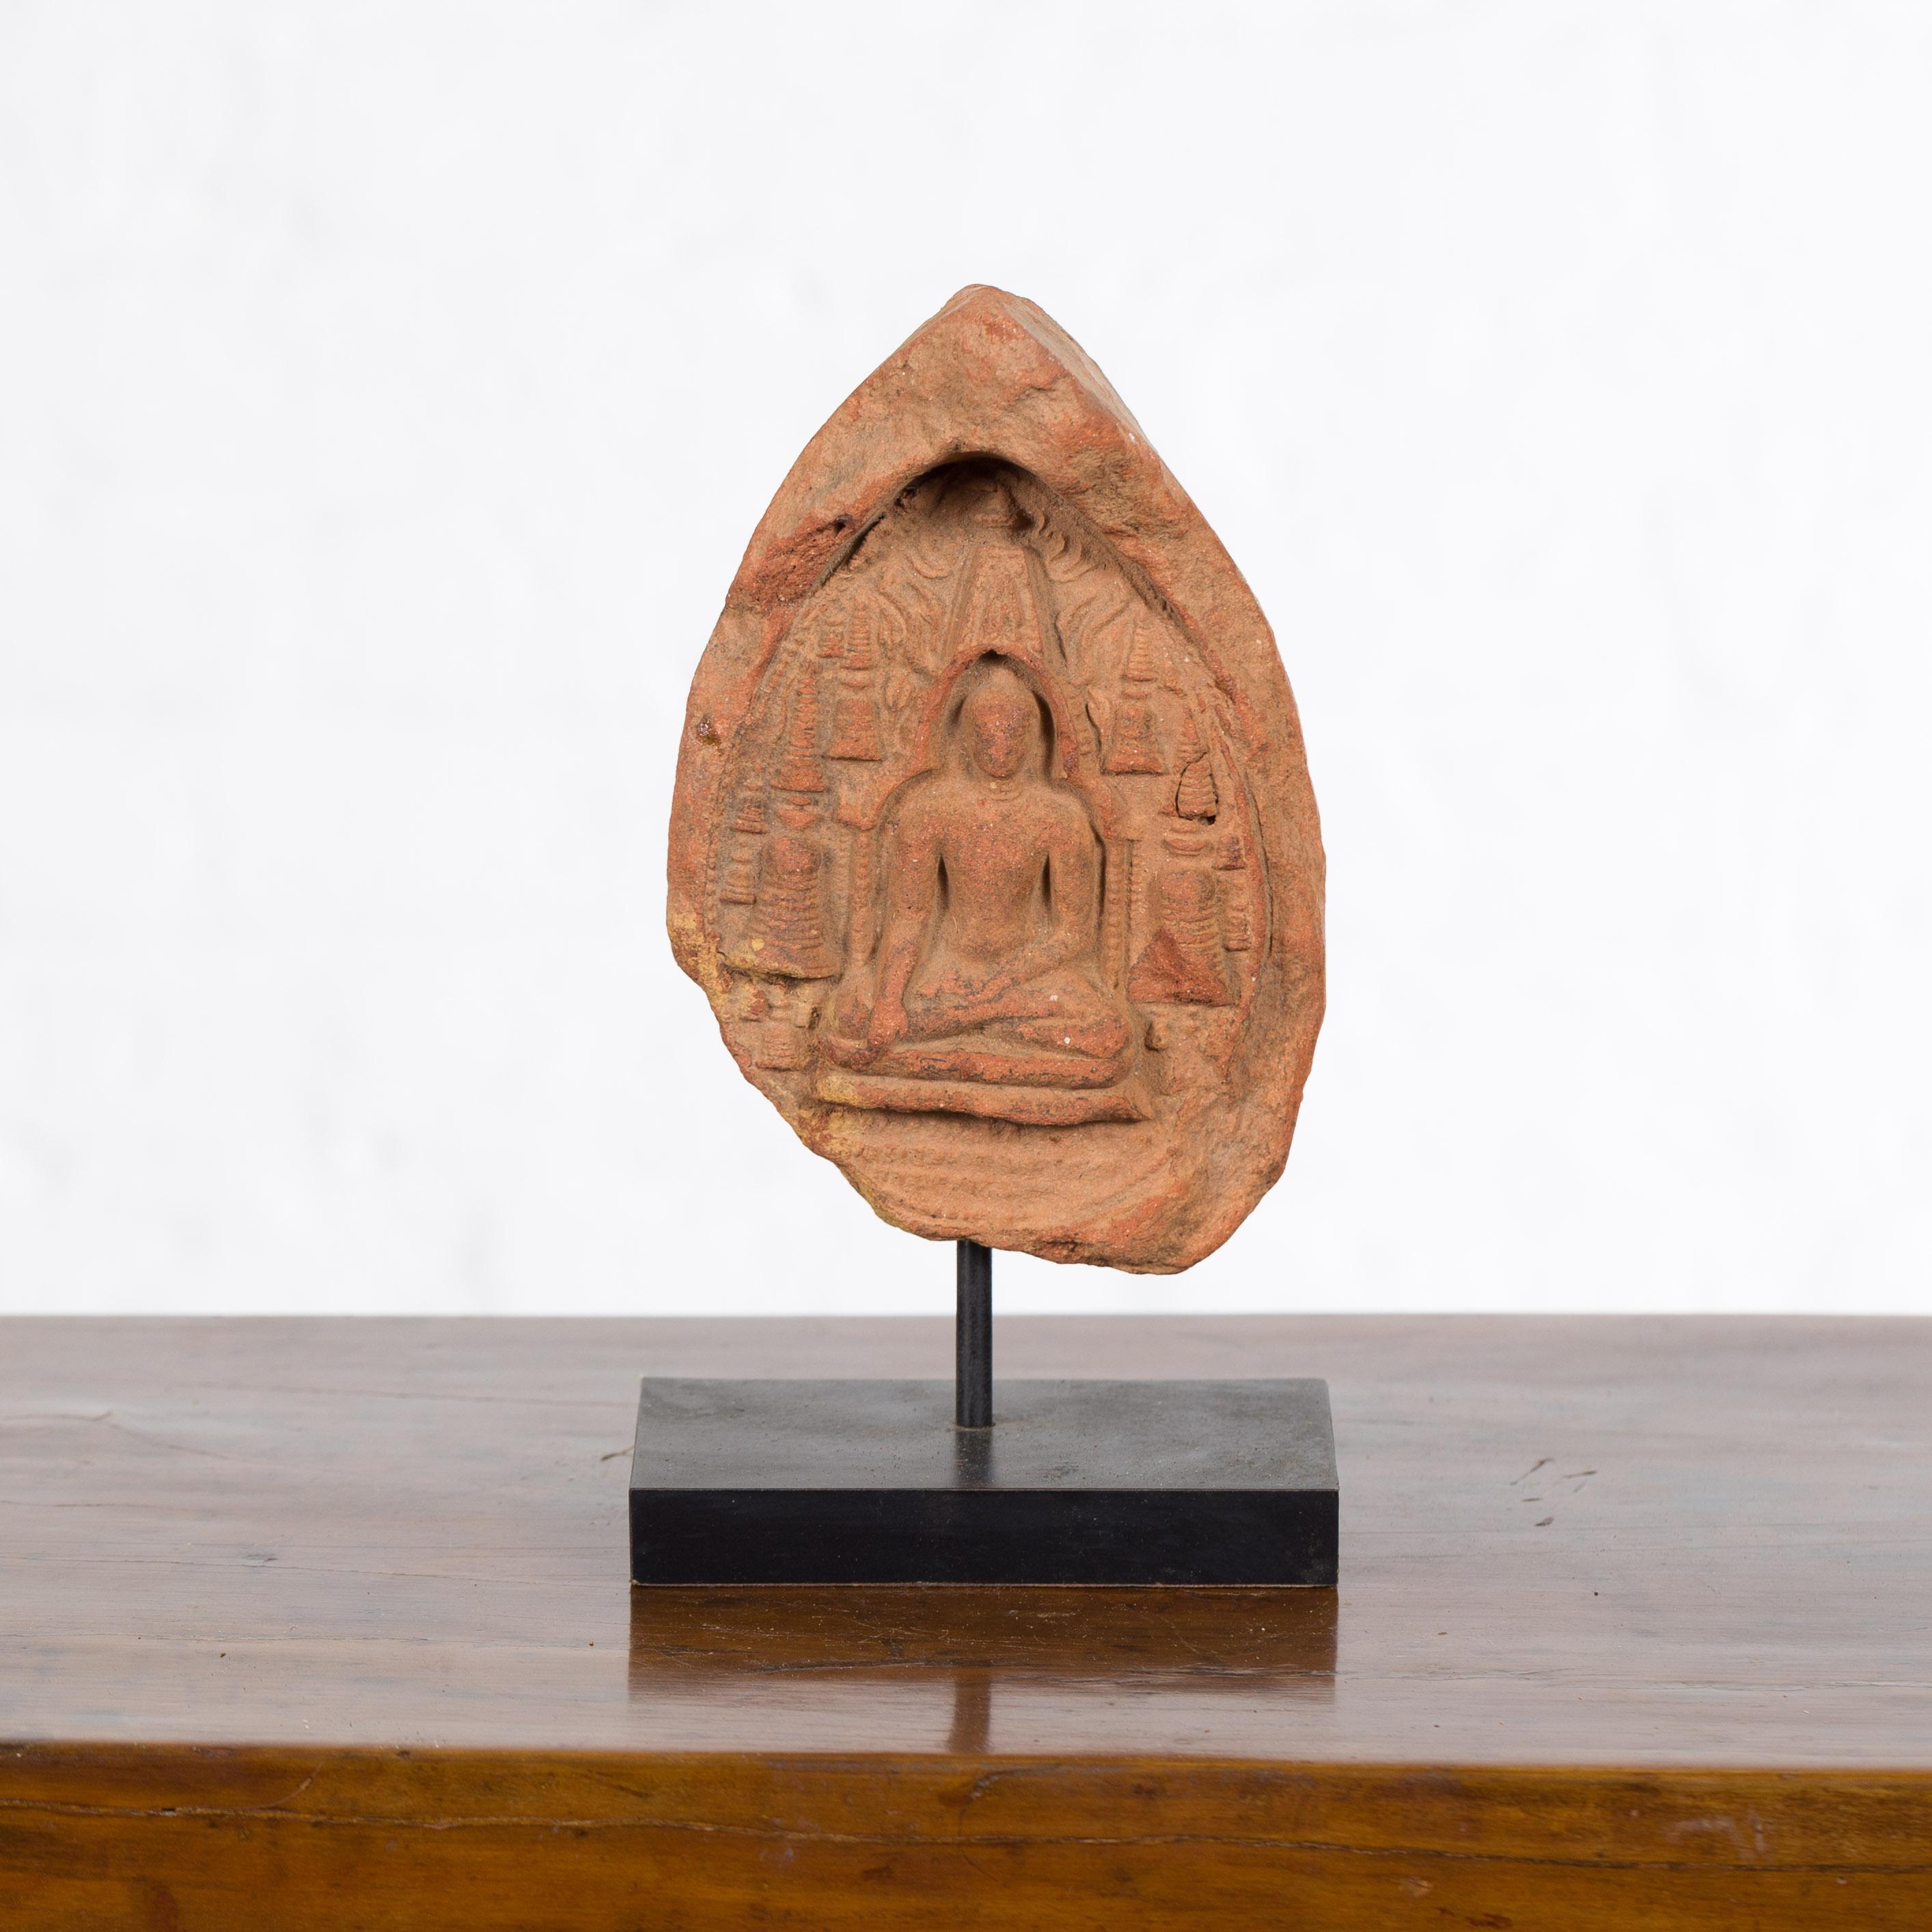 A Burmese Pagan Empire terracotta votive Buddha antique sculpture from the 12th or 13th century, mounted on a modern custom stand. Created in Burma during the Pagan Kingdom reign, this antique terracotta sculpture depicts the Buddha calling the